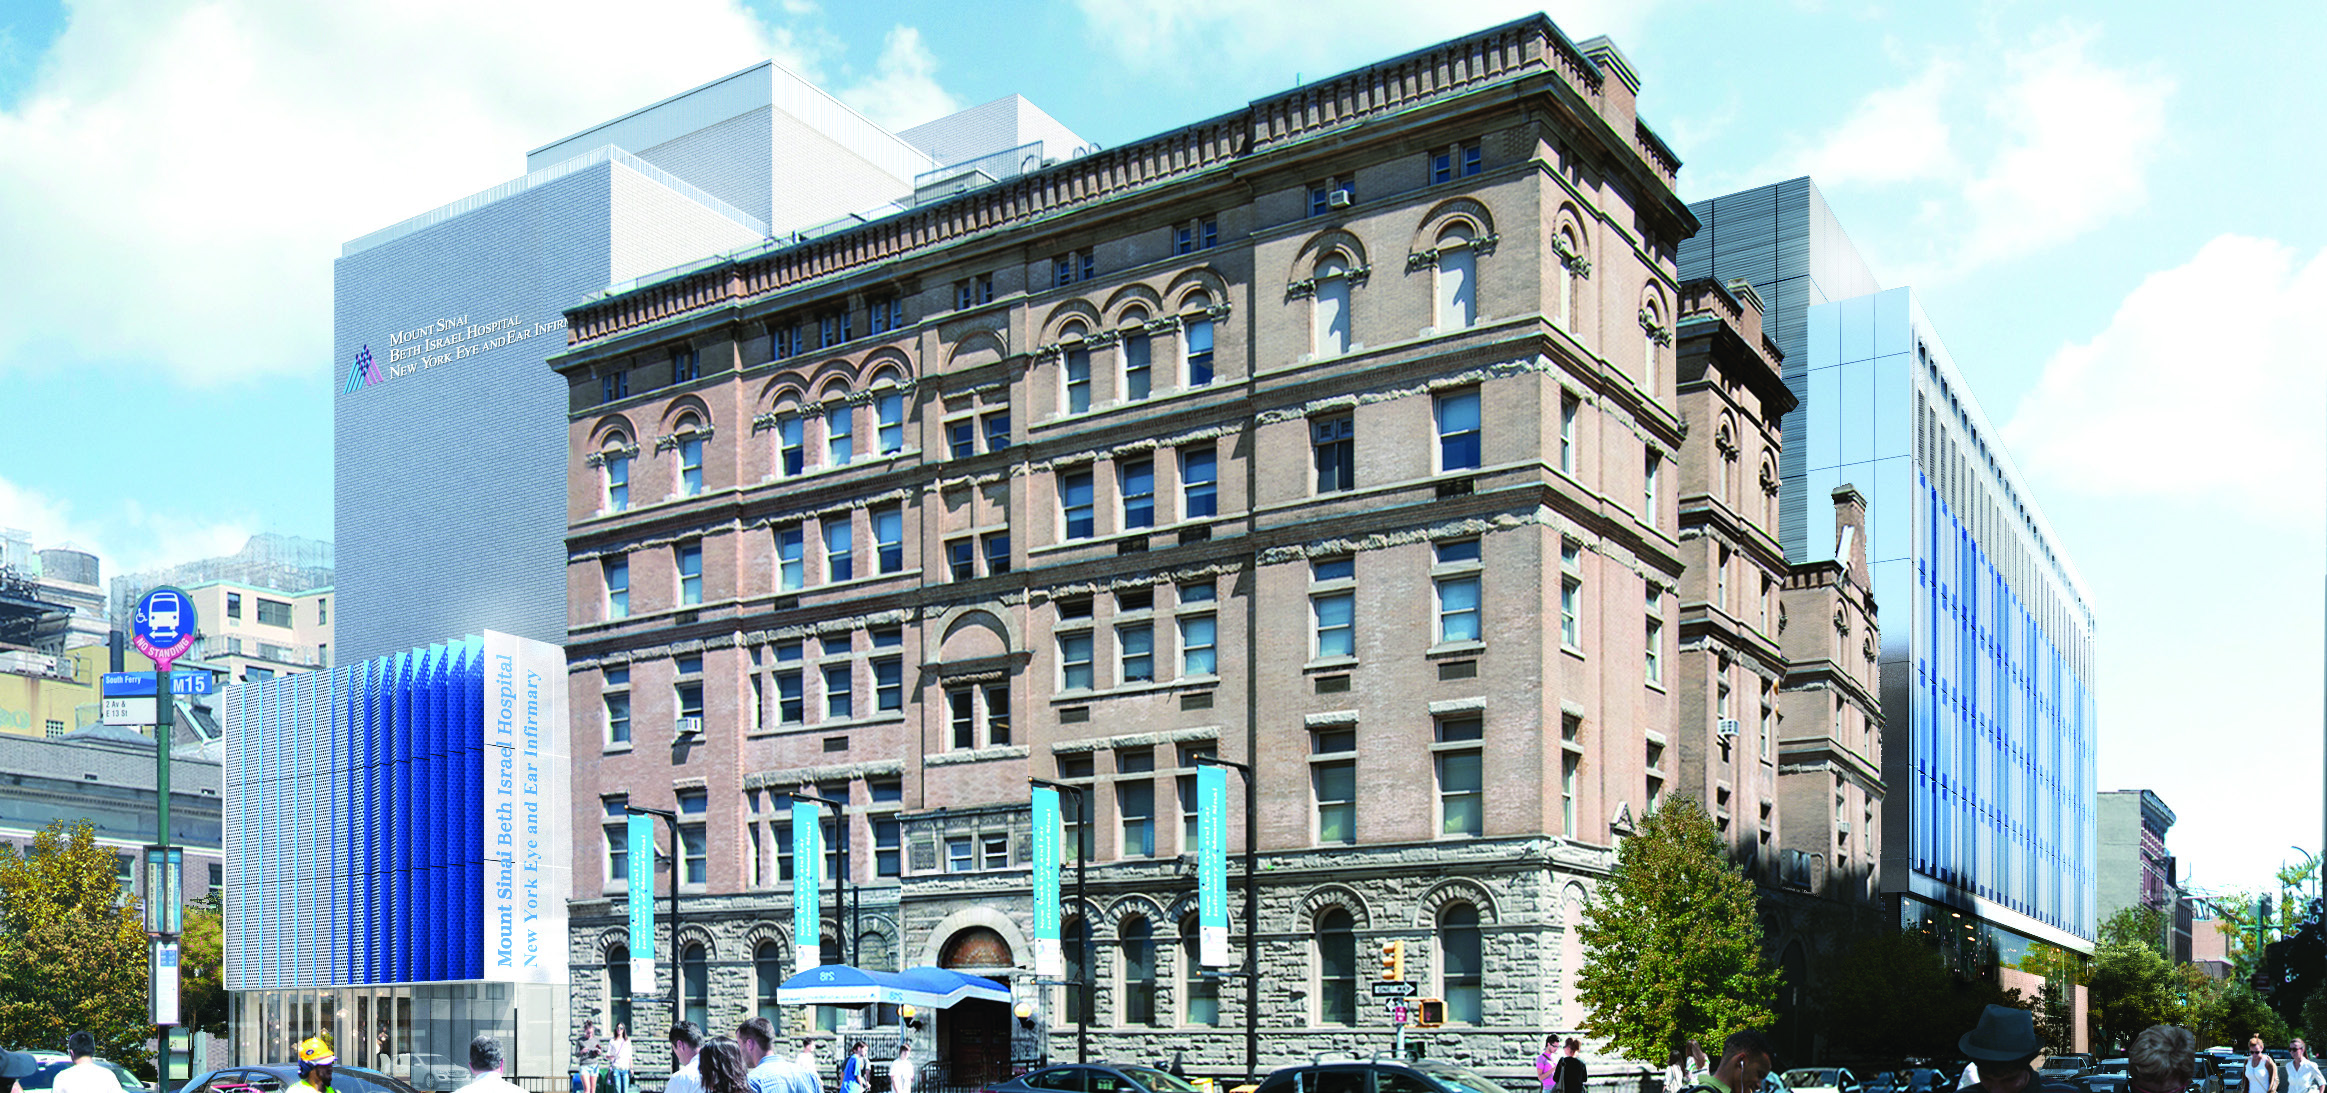 Mount Sinai files plans for new $600M Beth Israel facility in the East Village